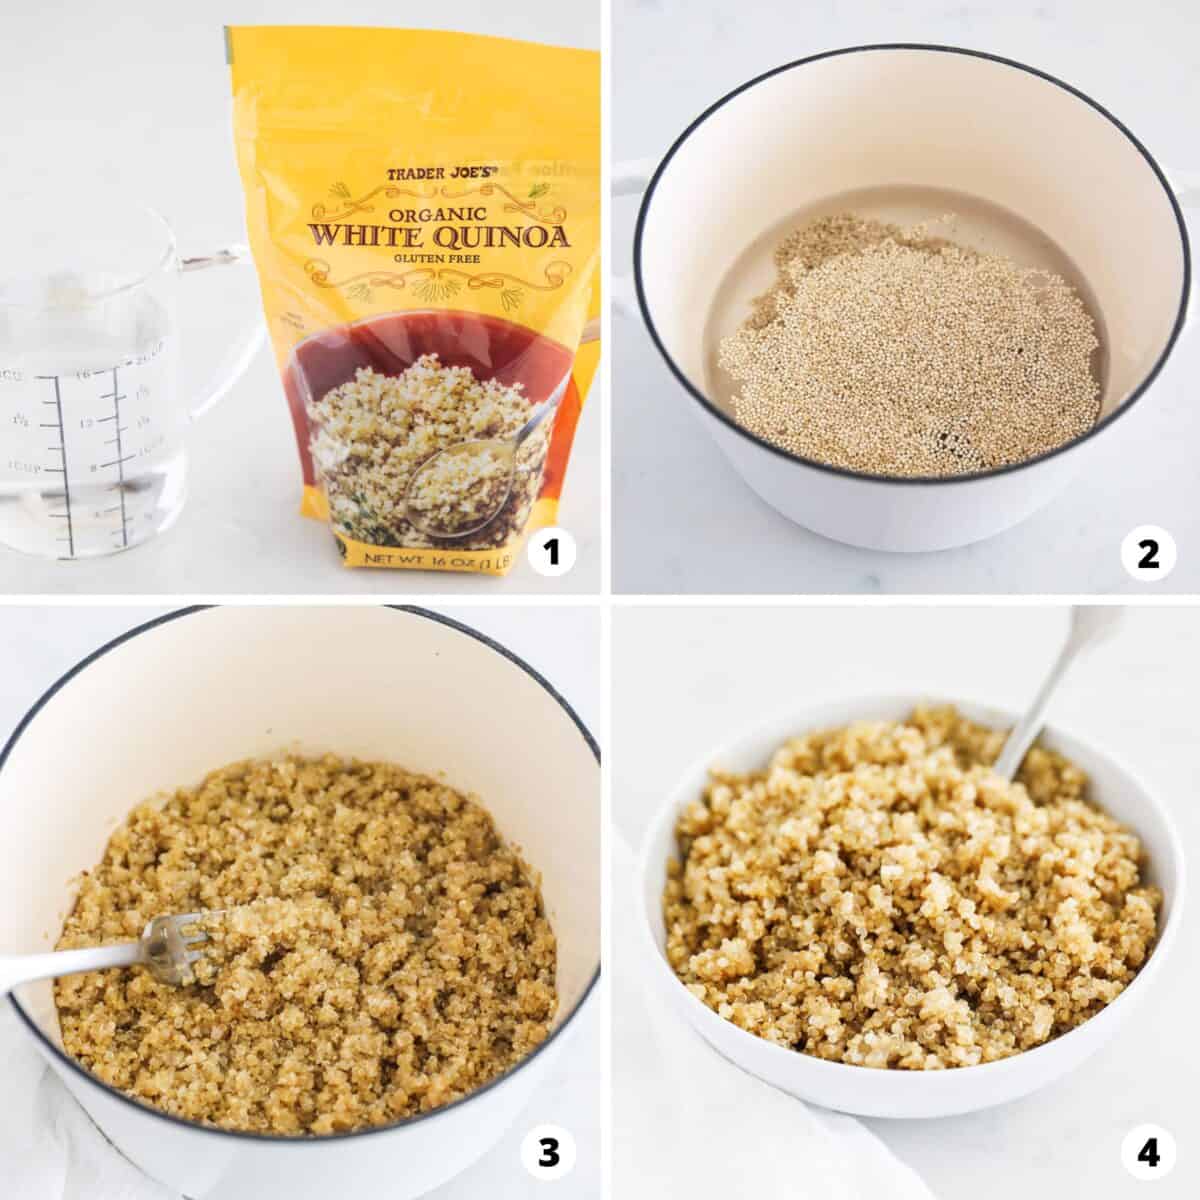 Showing how to cook quinoa in a 4 step collage.